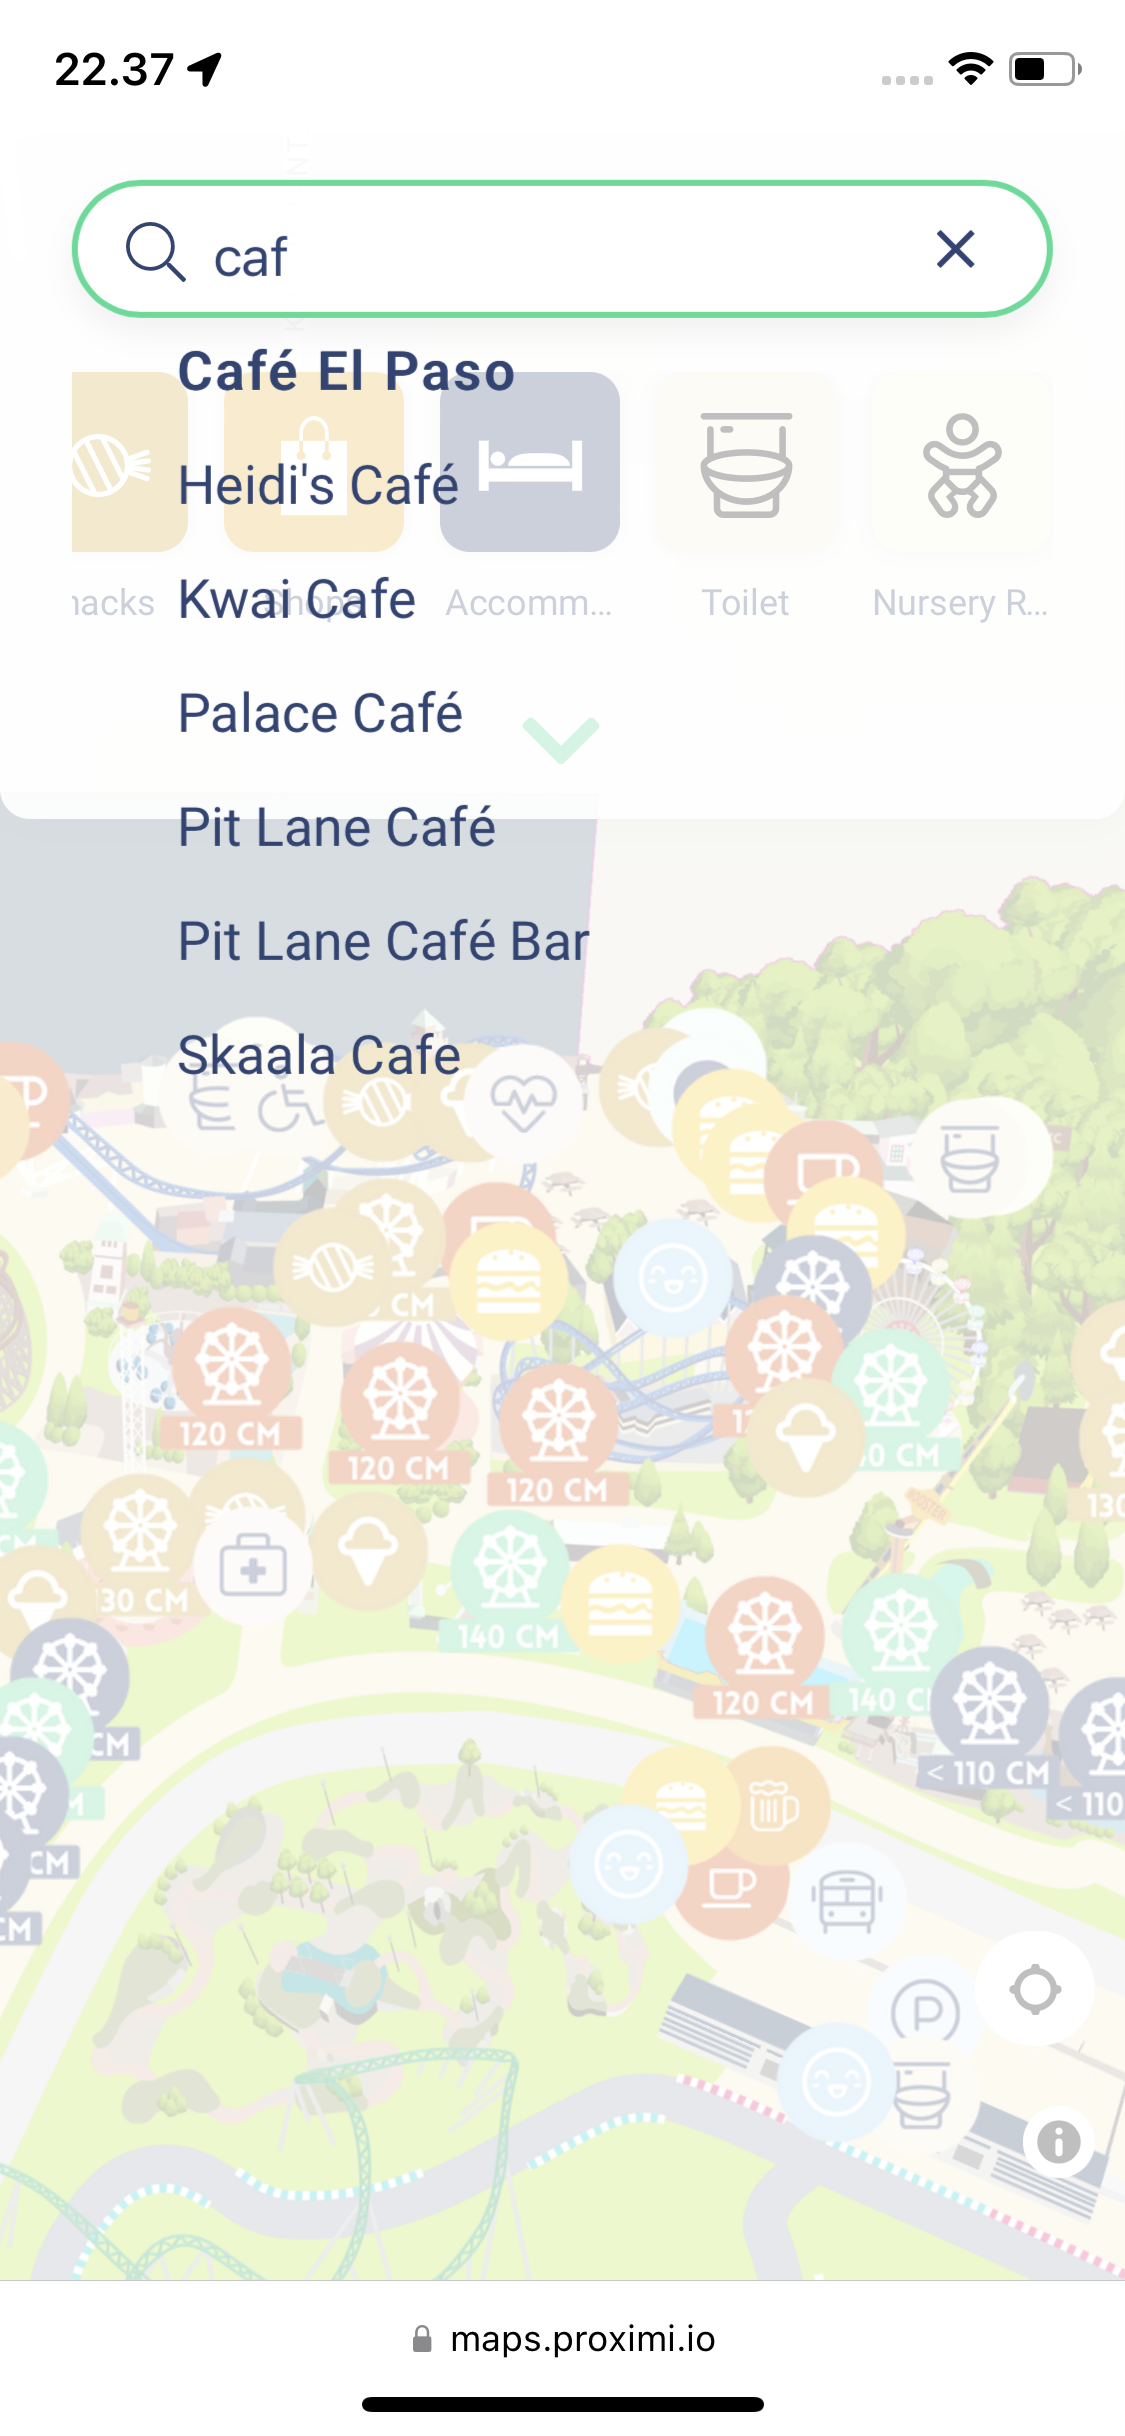 Interactive map and search at PowerPark amusement park